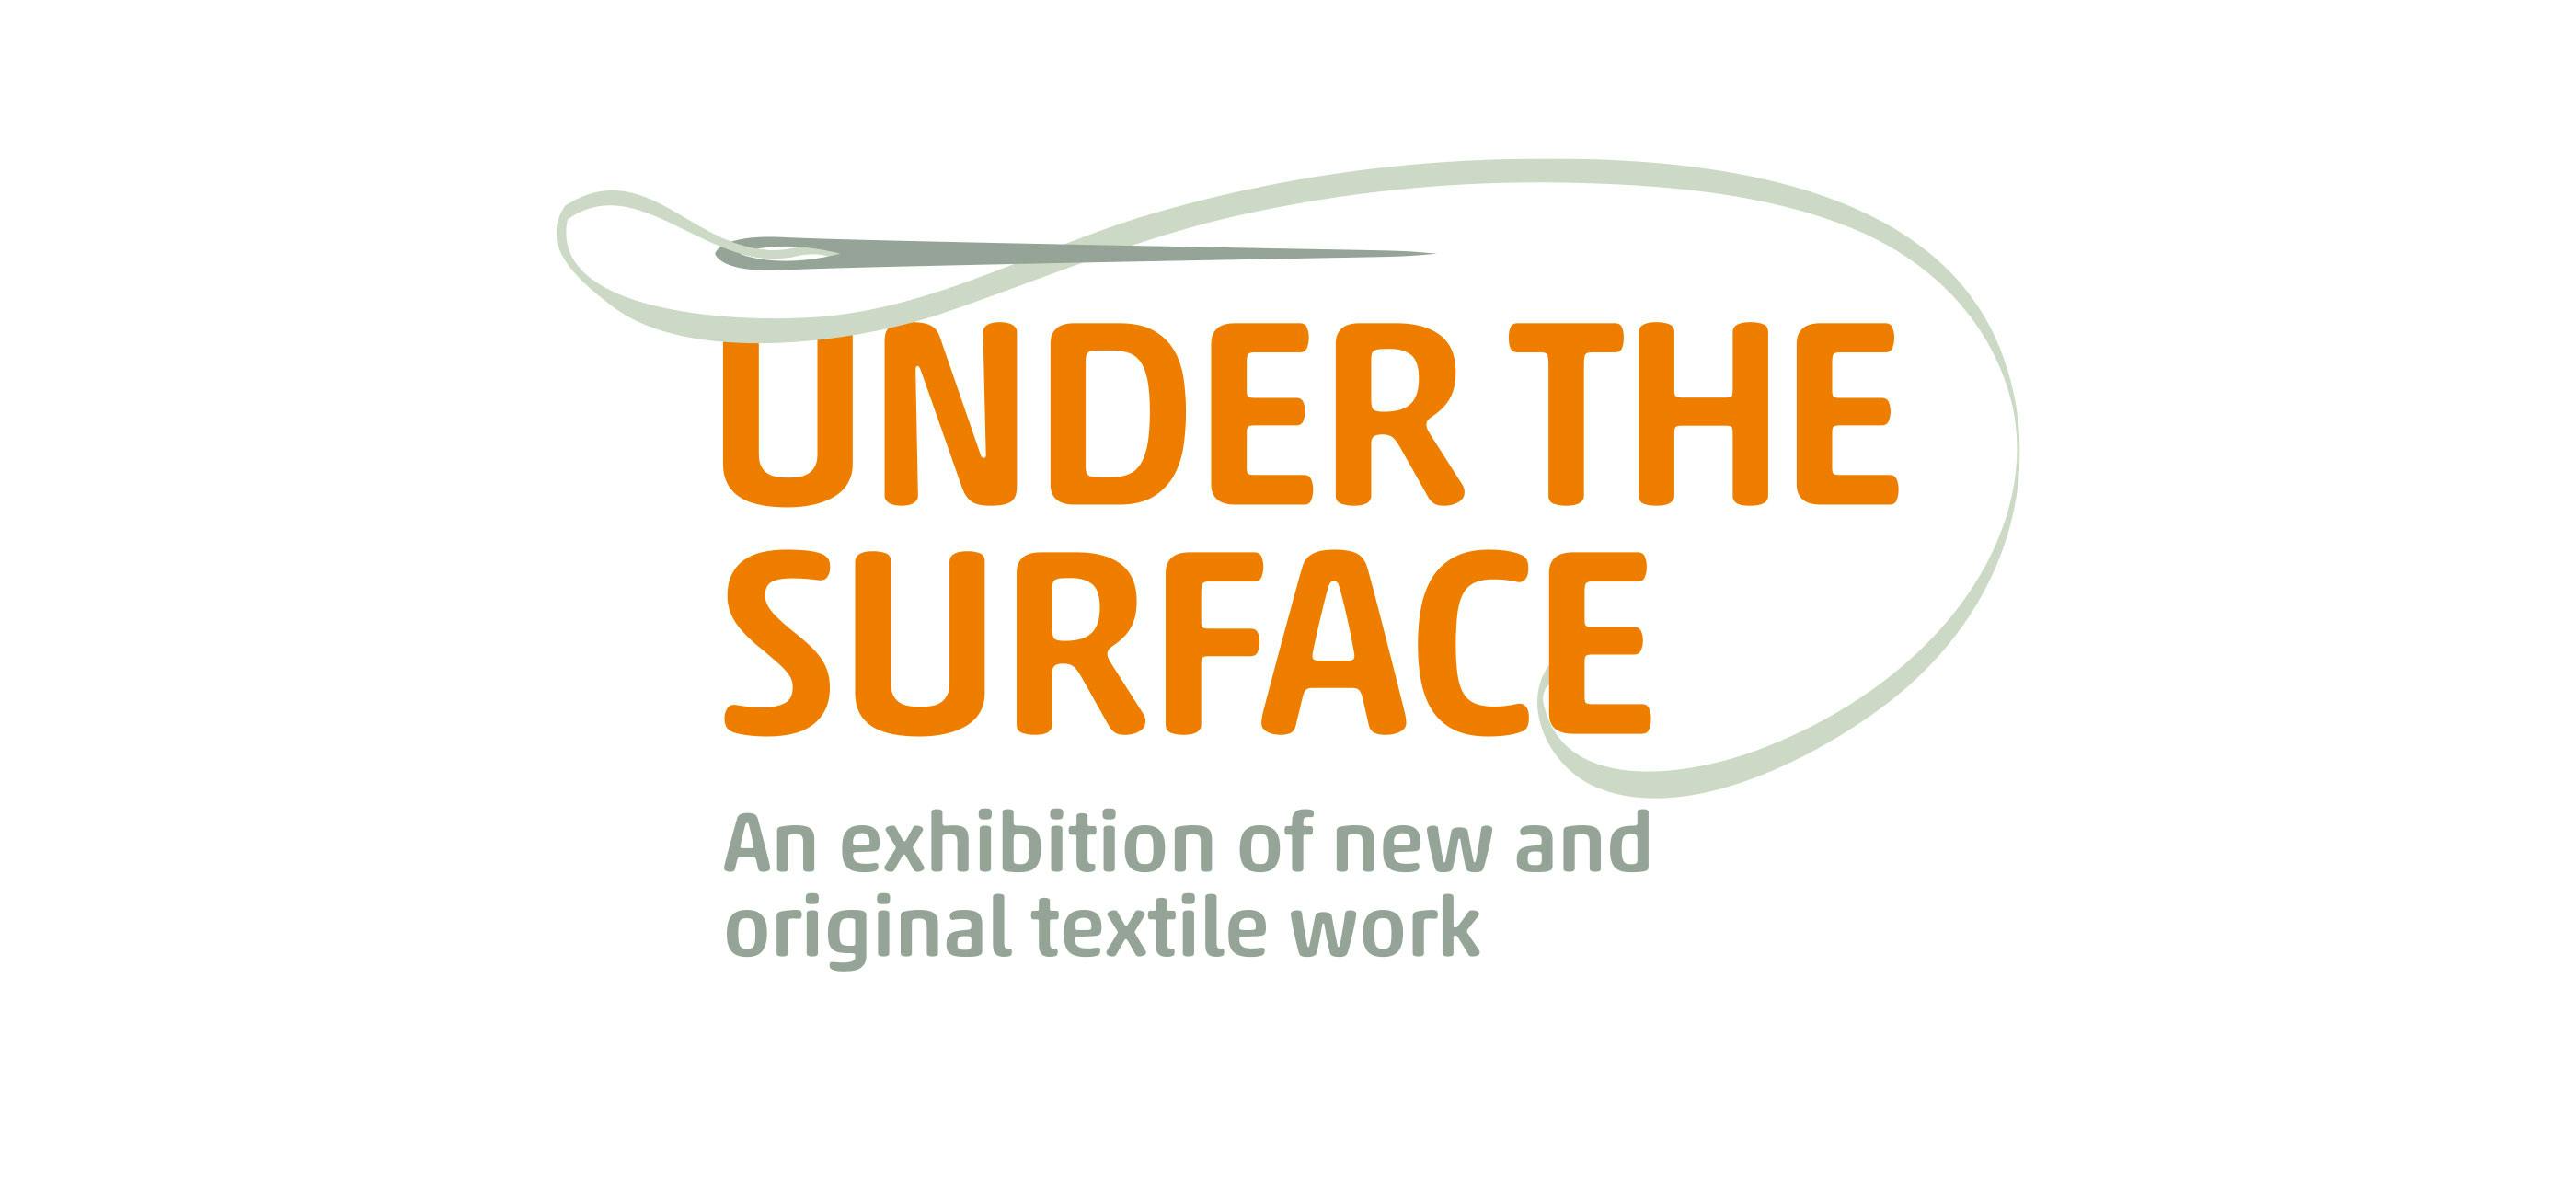 Under The Surface an exhibition of new and original textile work